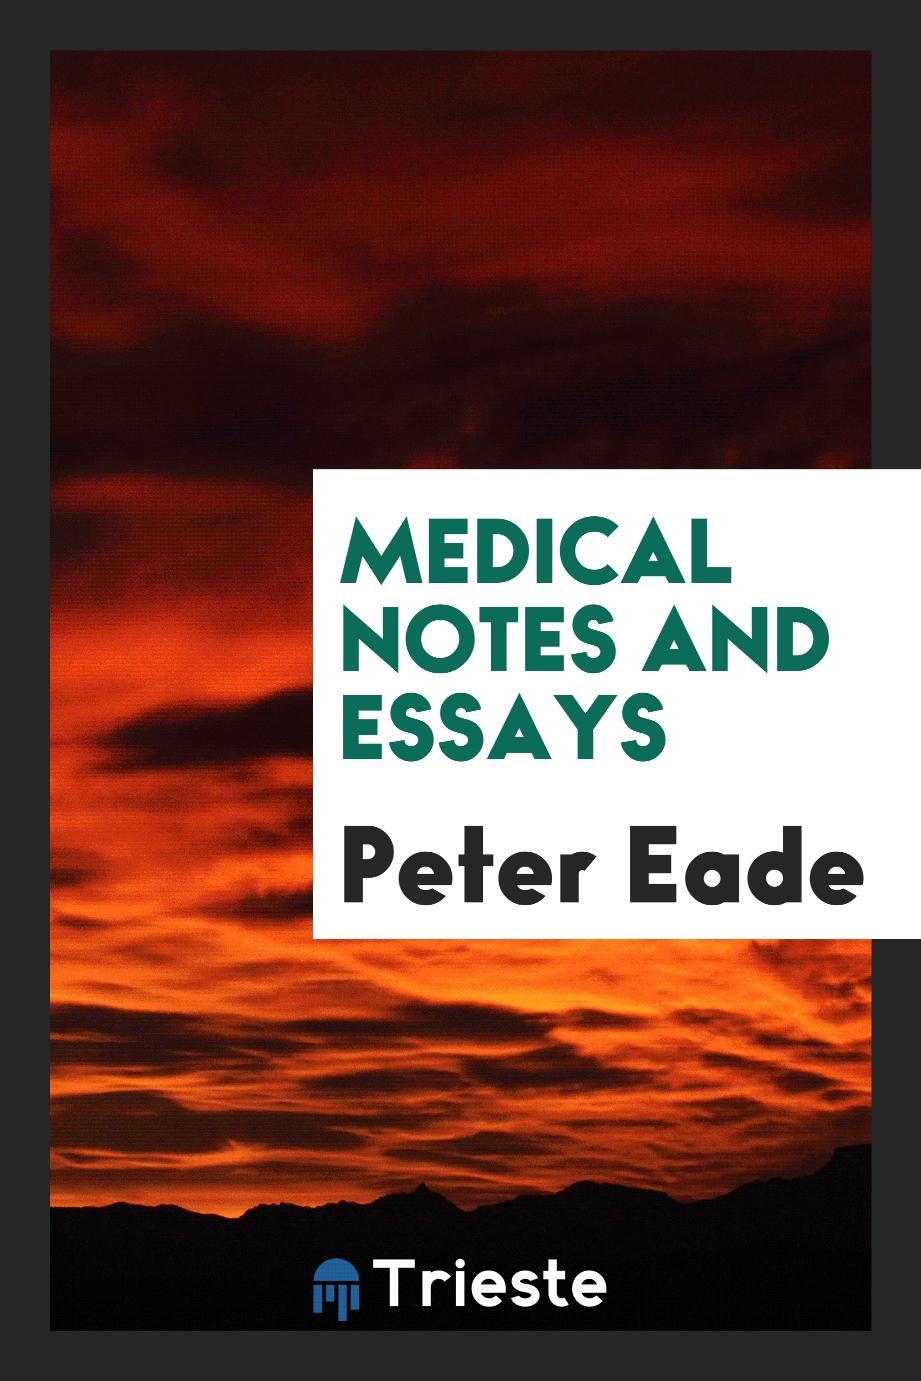 Medical Notes and Essays